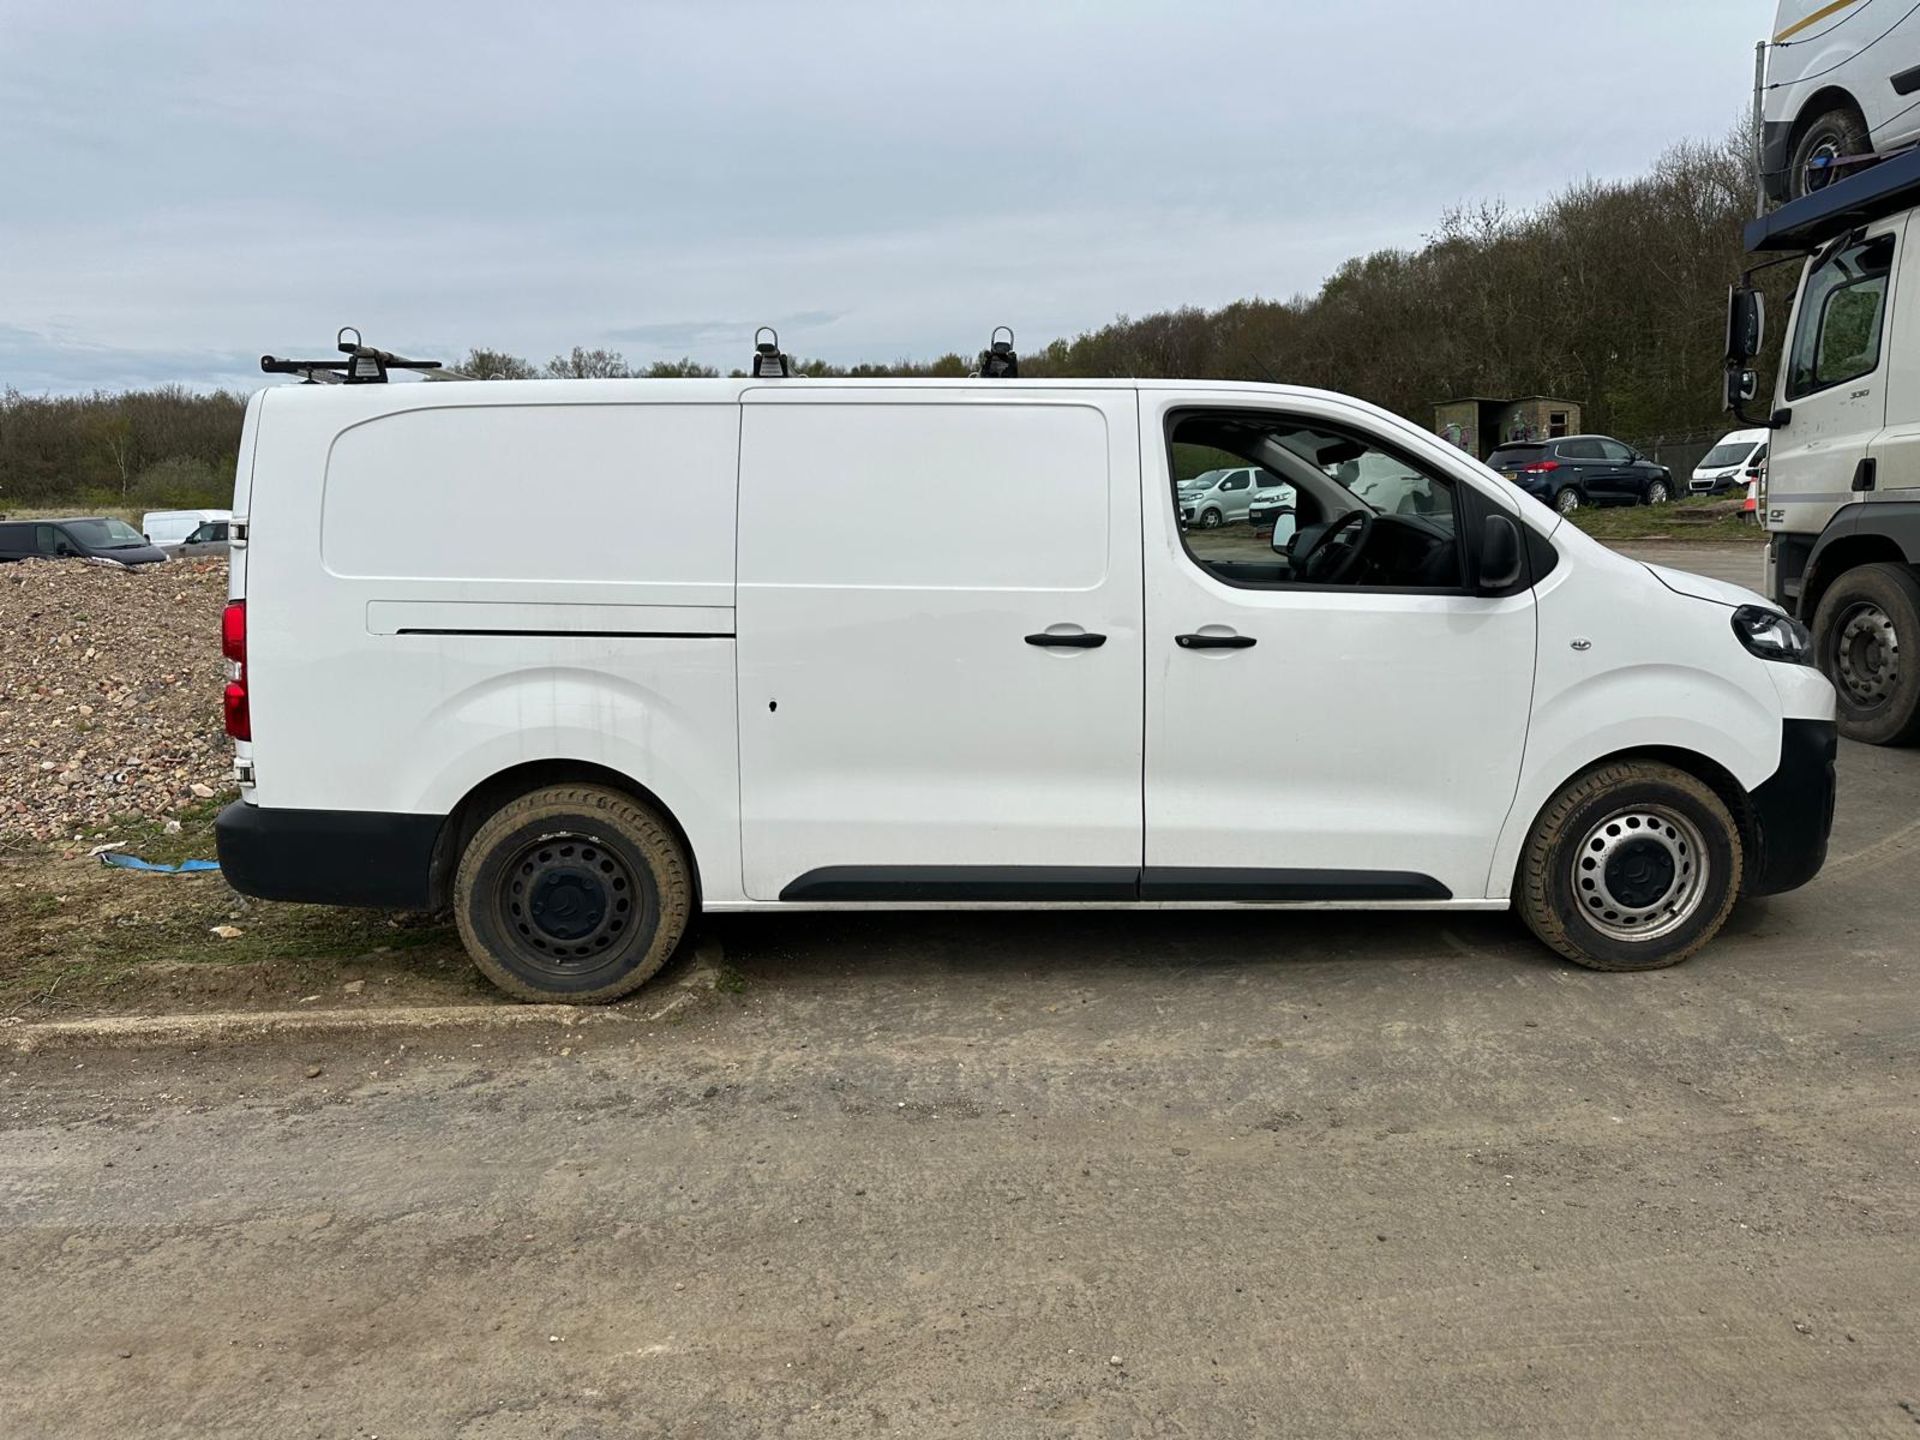 2020 20 CITROEN DISPATCH PANEL VAN - 2.0 6 SPEED - 111K MILES - AIR CON - PLY LINED - EURO 6  - Image 4 of 10